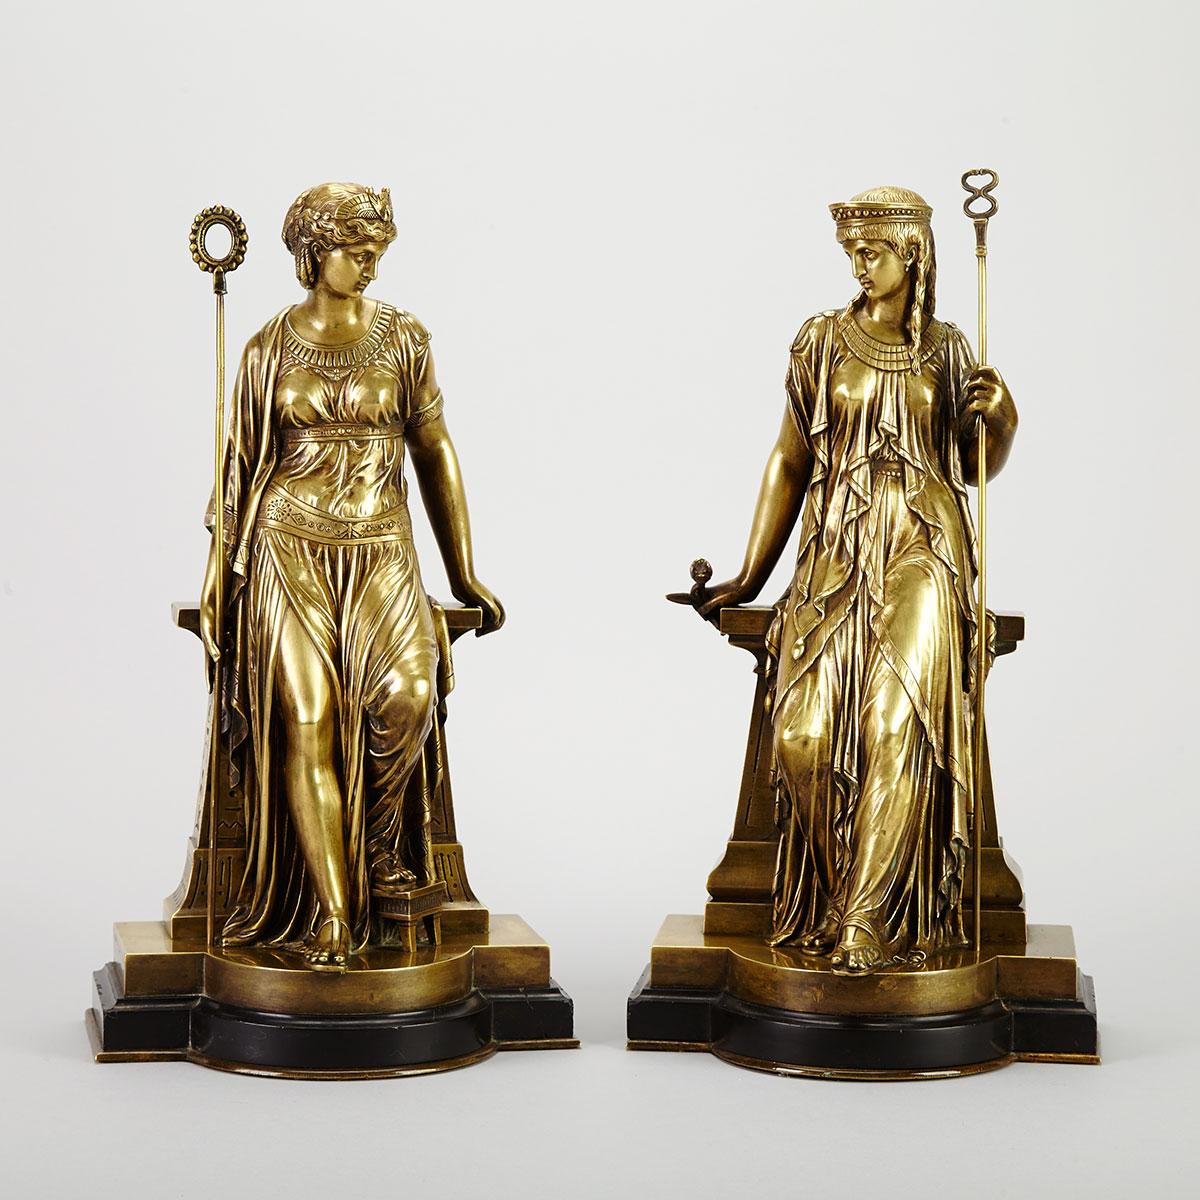 Pair of French Bronze Figures of Maidens, Eutrope Bouret, (1833-1906), 1872